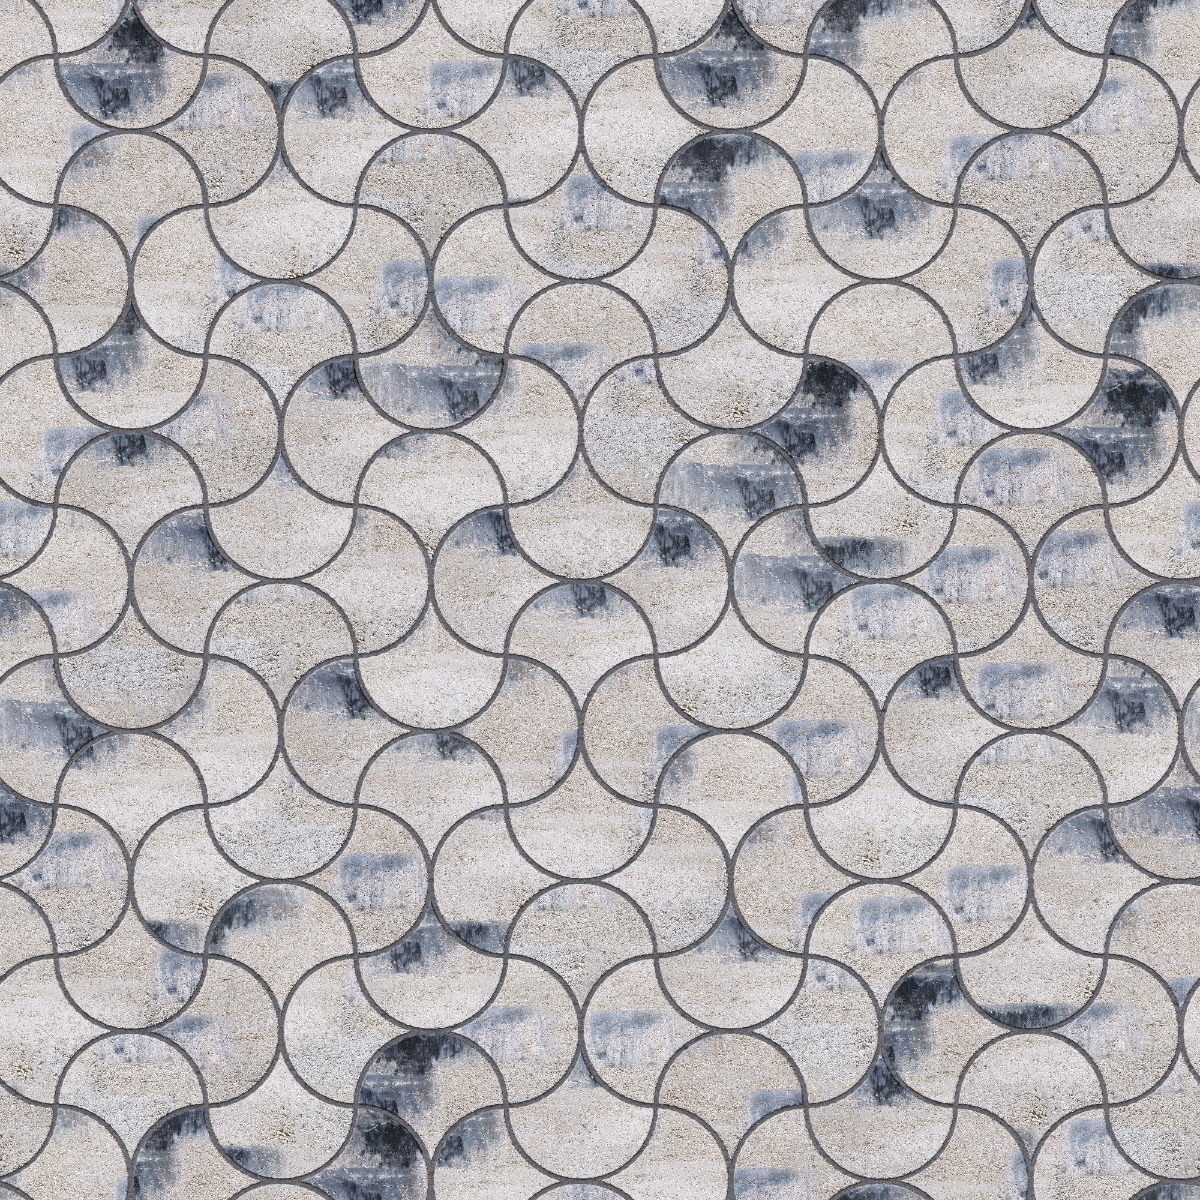 A seamless brick texture with charcoal brick units arranged in a Ogee Fishscale pattern